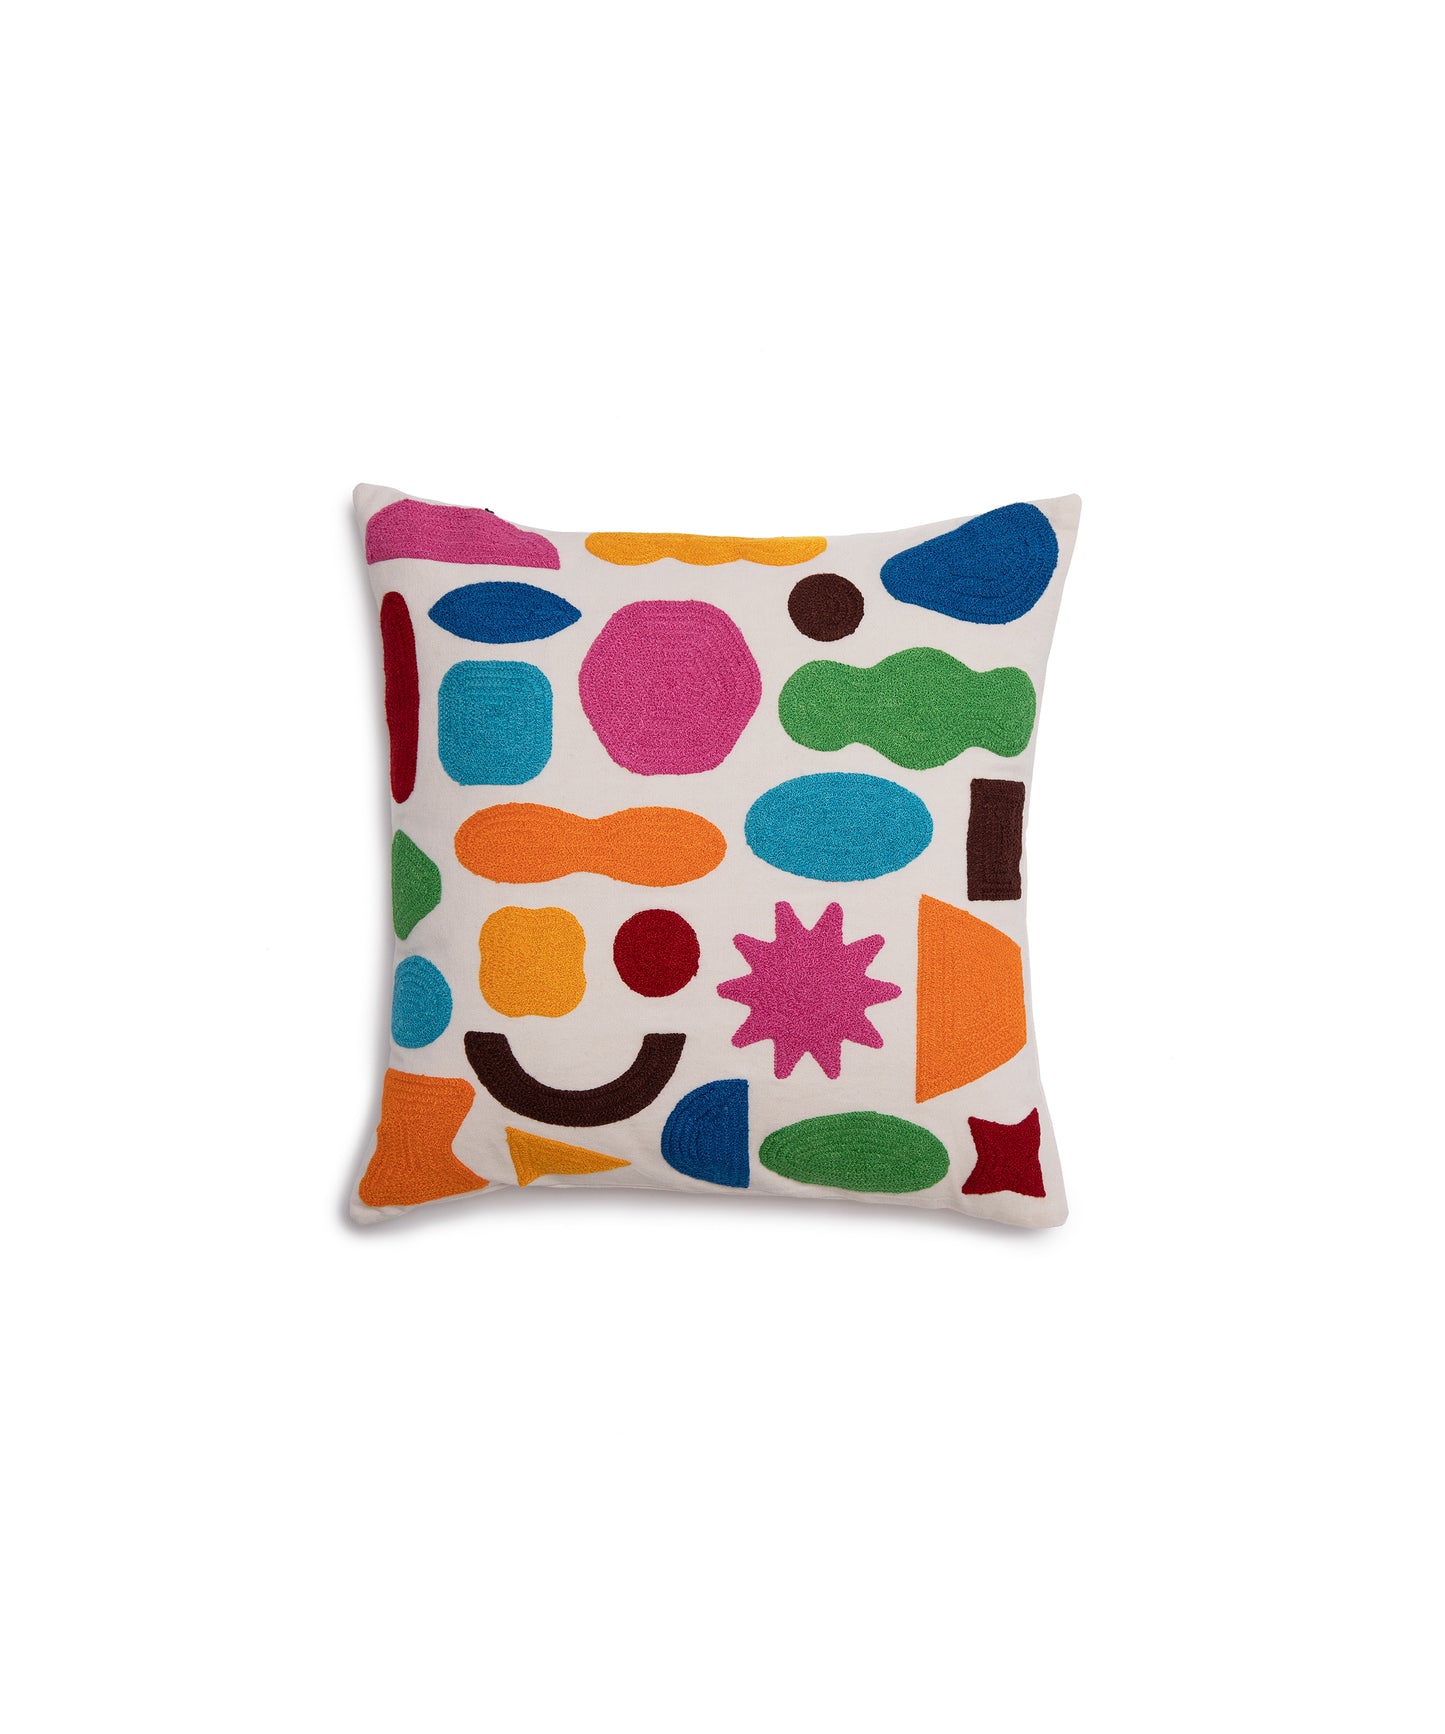 Image of the Odds and Ends Pillow Cover with a variation of organic shapes in blue, green, pink, brown, yellow, and orange on a white base. Pillow Cover is 100% cotton and measures 18 inches square.